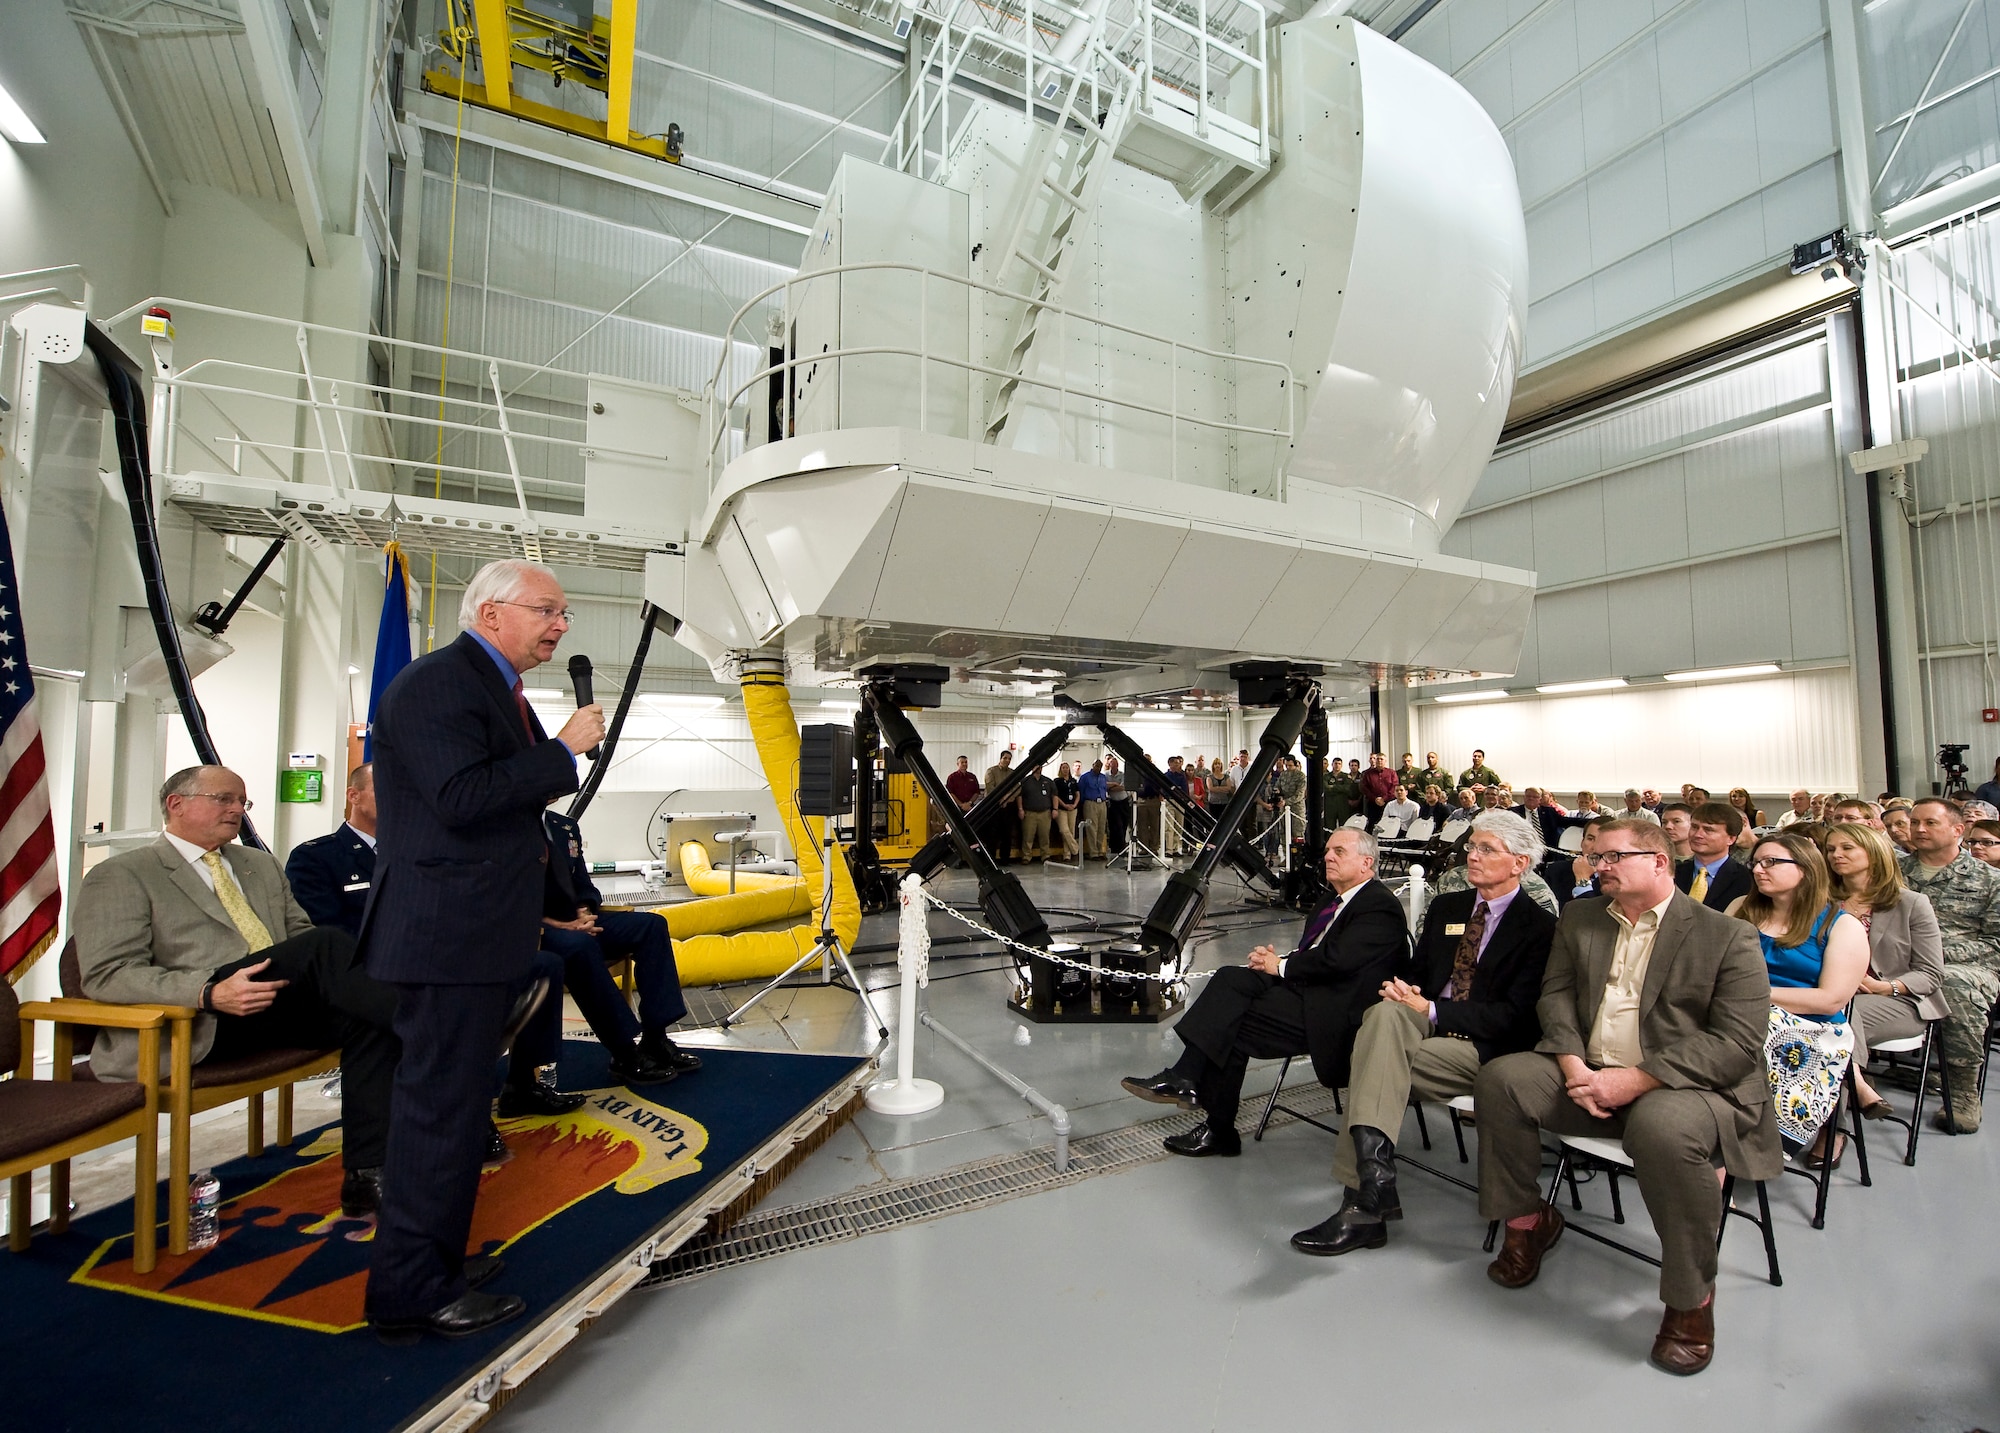 U.S. Rep. Randy Neugebauer speaks at the dedication ceremony for the new C-130J Super Hercules simulator April 22, 2014, at Dyess Air Force Base, Texas. Dyess is the first installation to receive this modern C-130J simulator with Vital-10 technology. Vital-10 is an advanced visual display package with a higher resolution and a more realistic display. System benefits include the ability to accomplish initial and recurring qualifications for missions, such as the Joint Precision Airdrop System and Heavyweight Assault Landings. (U.S. Air Force photo by Staff Sgt. Richard Ebensberger/Released)